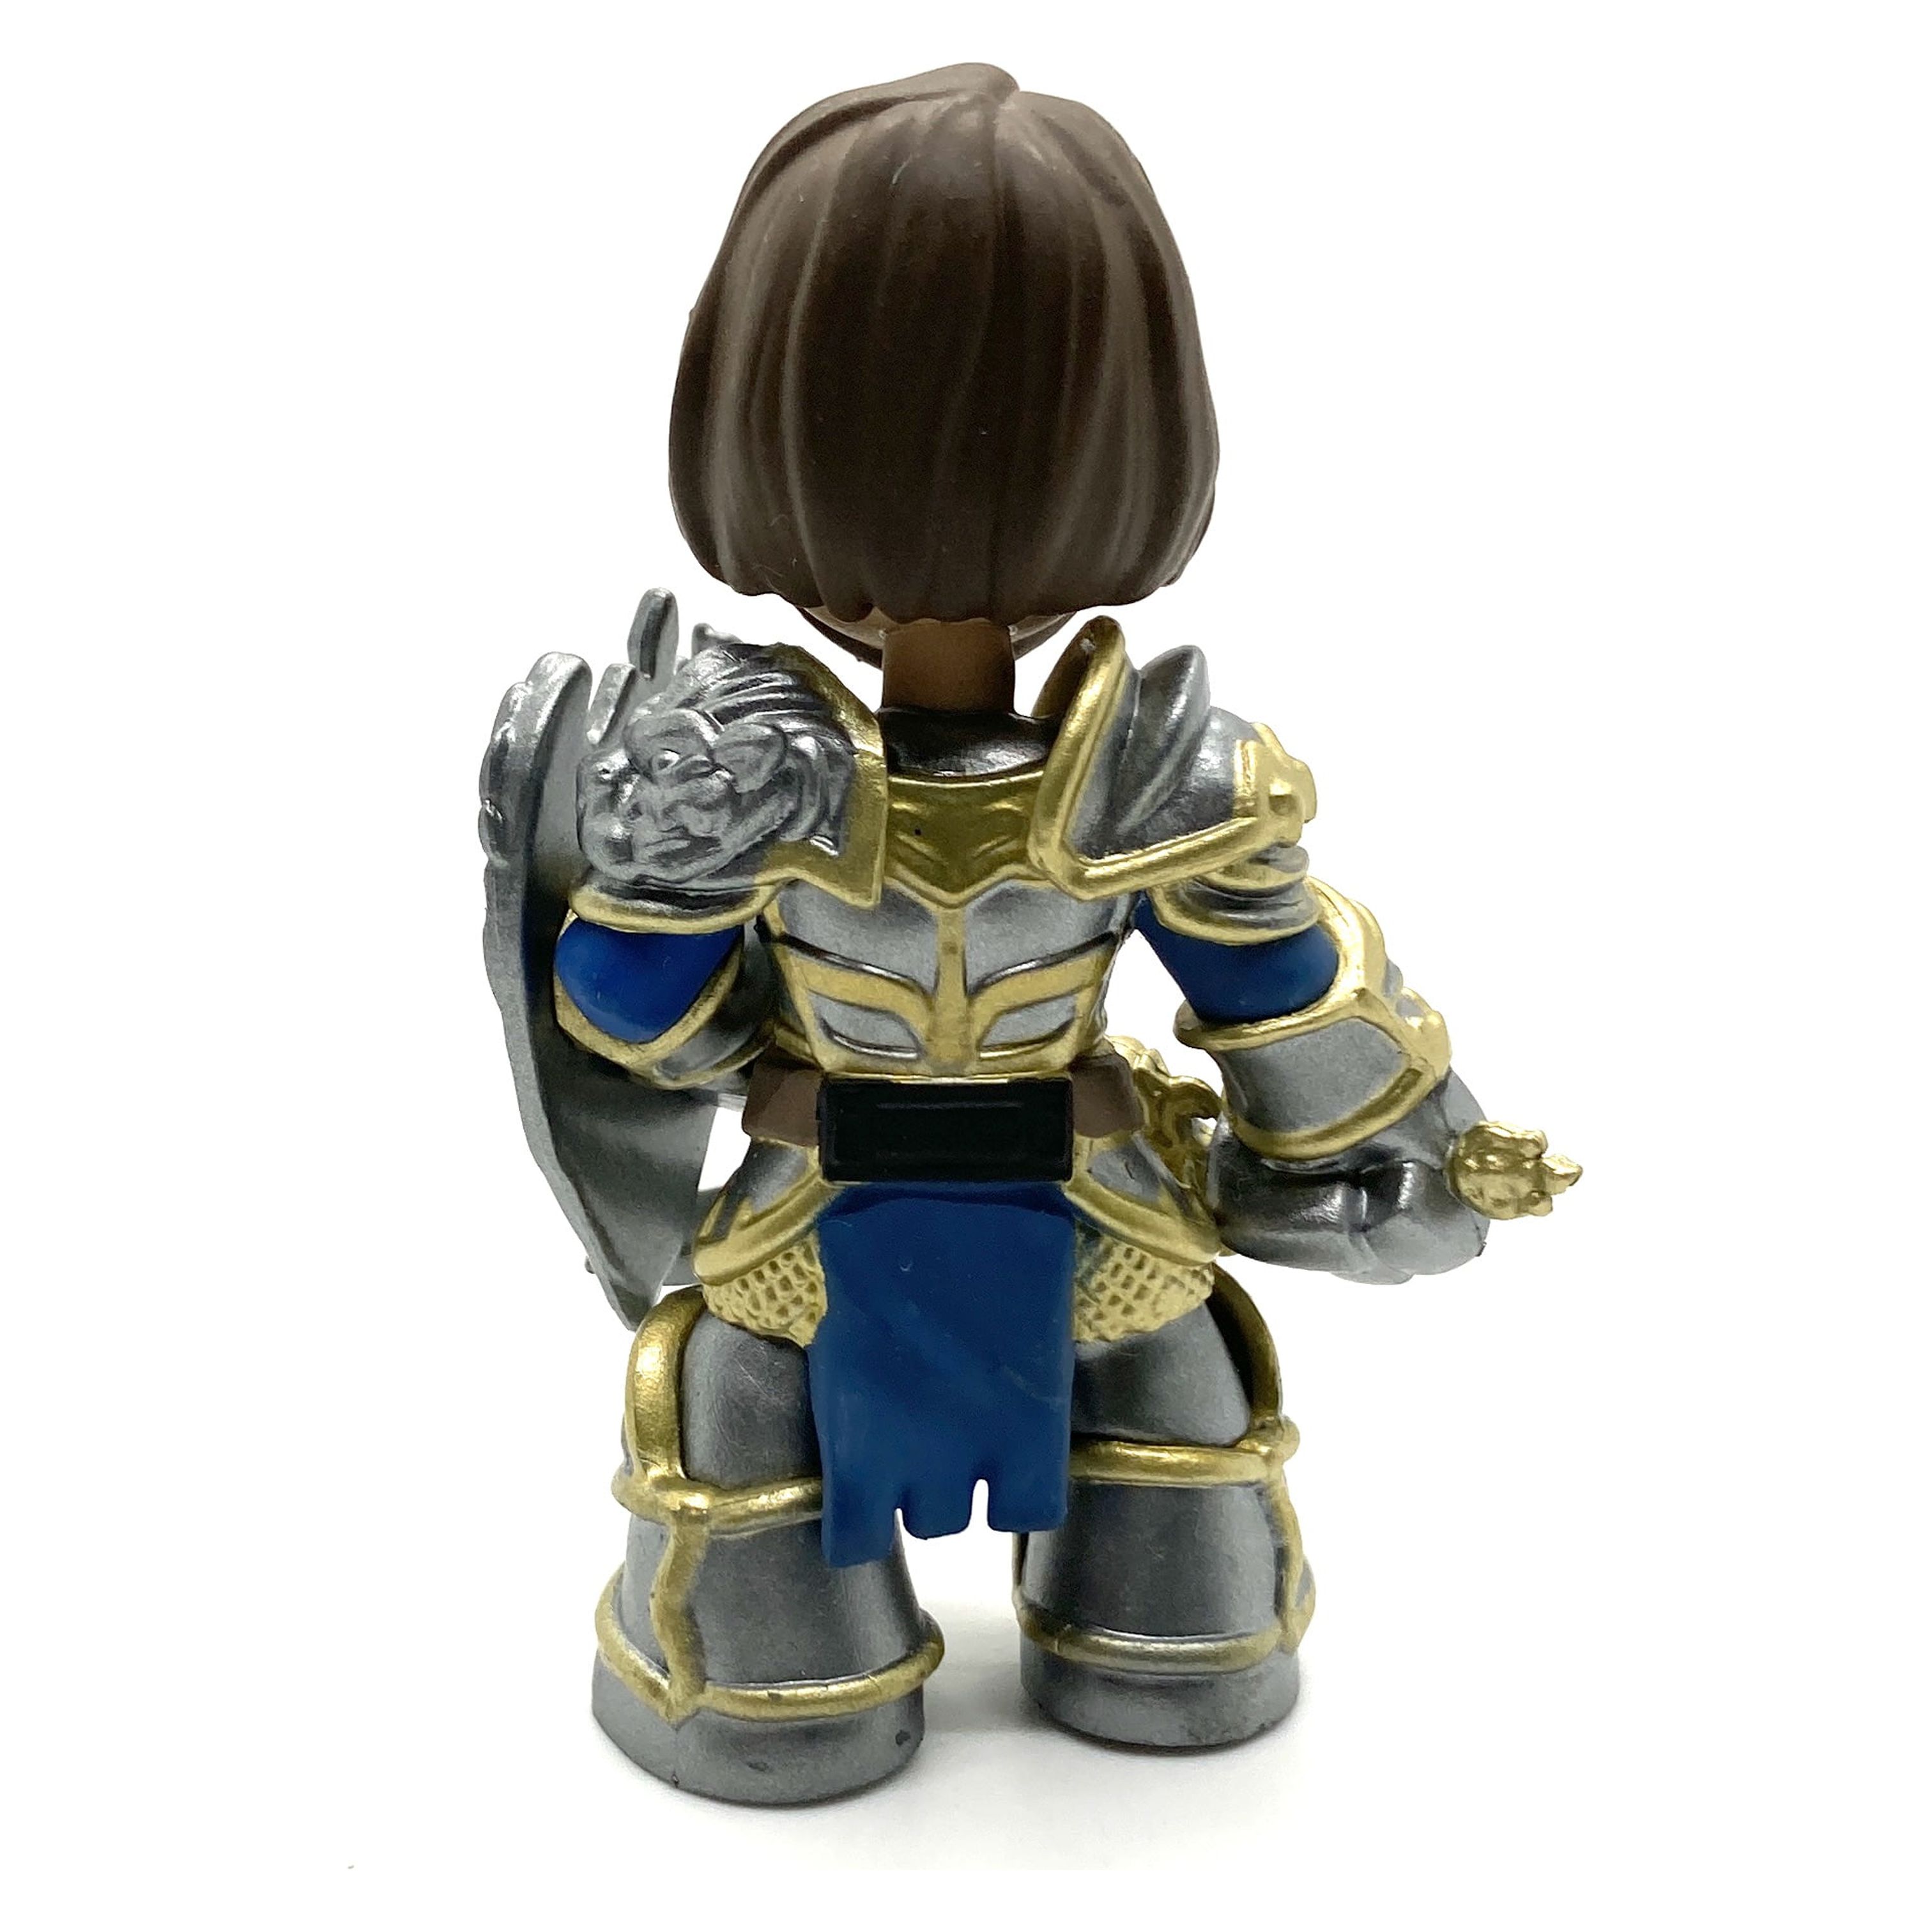 Funko Mystery Mini  World of Warcraft King LLane Wrynn with Armored Vinyl Figure - image 2 of 2